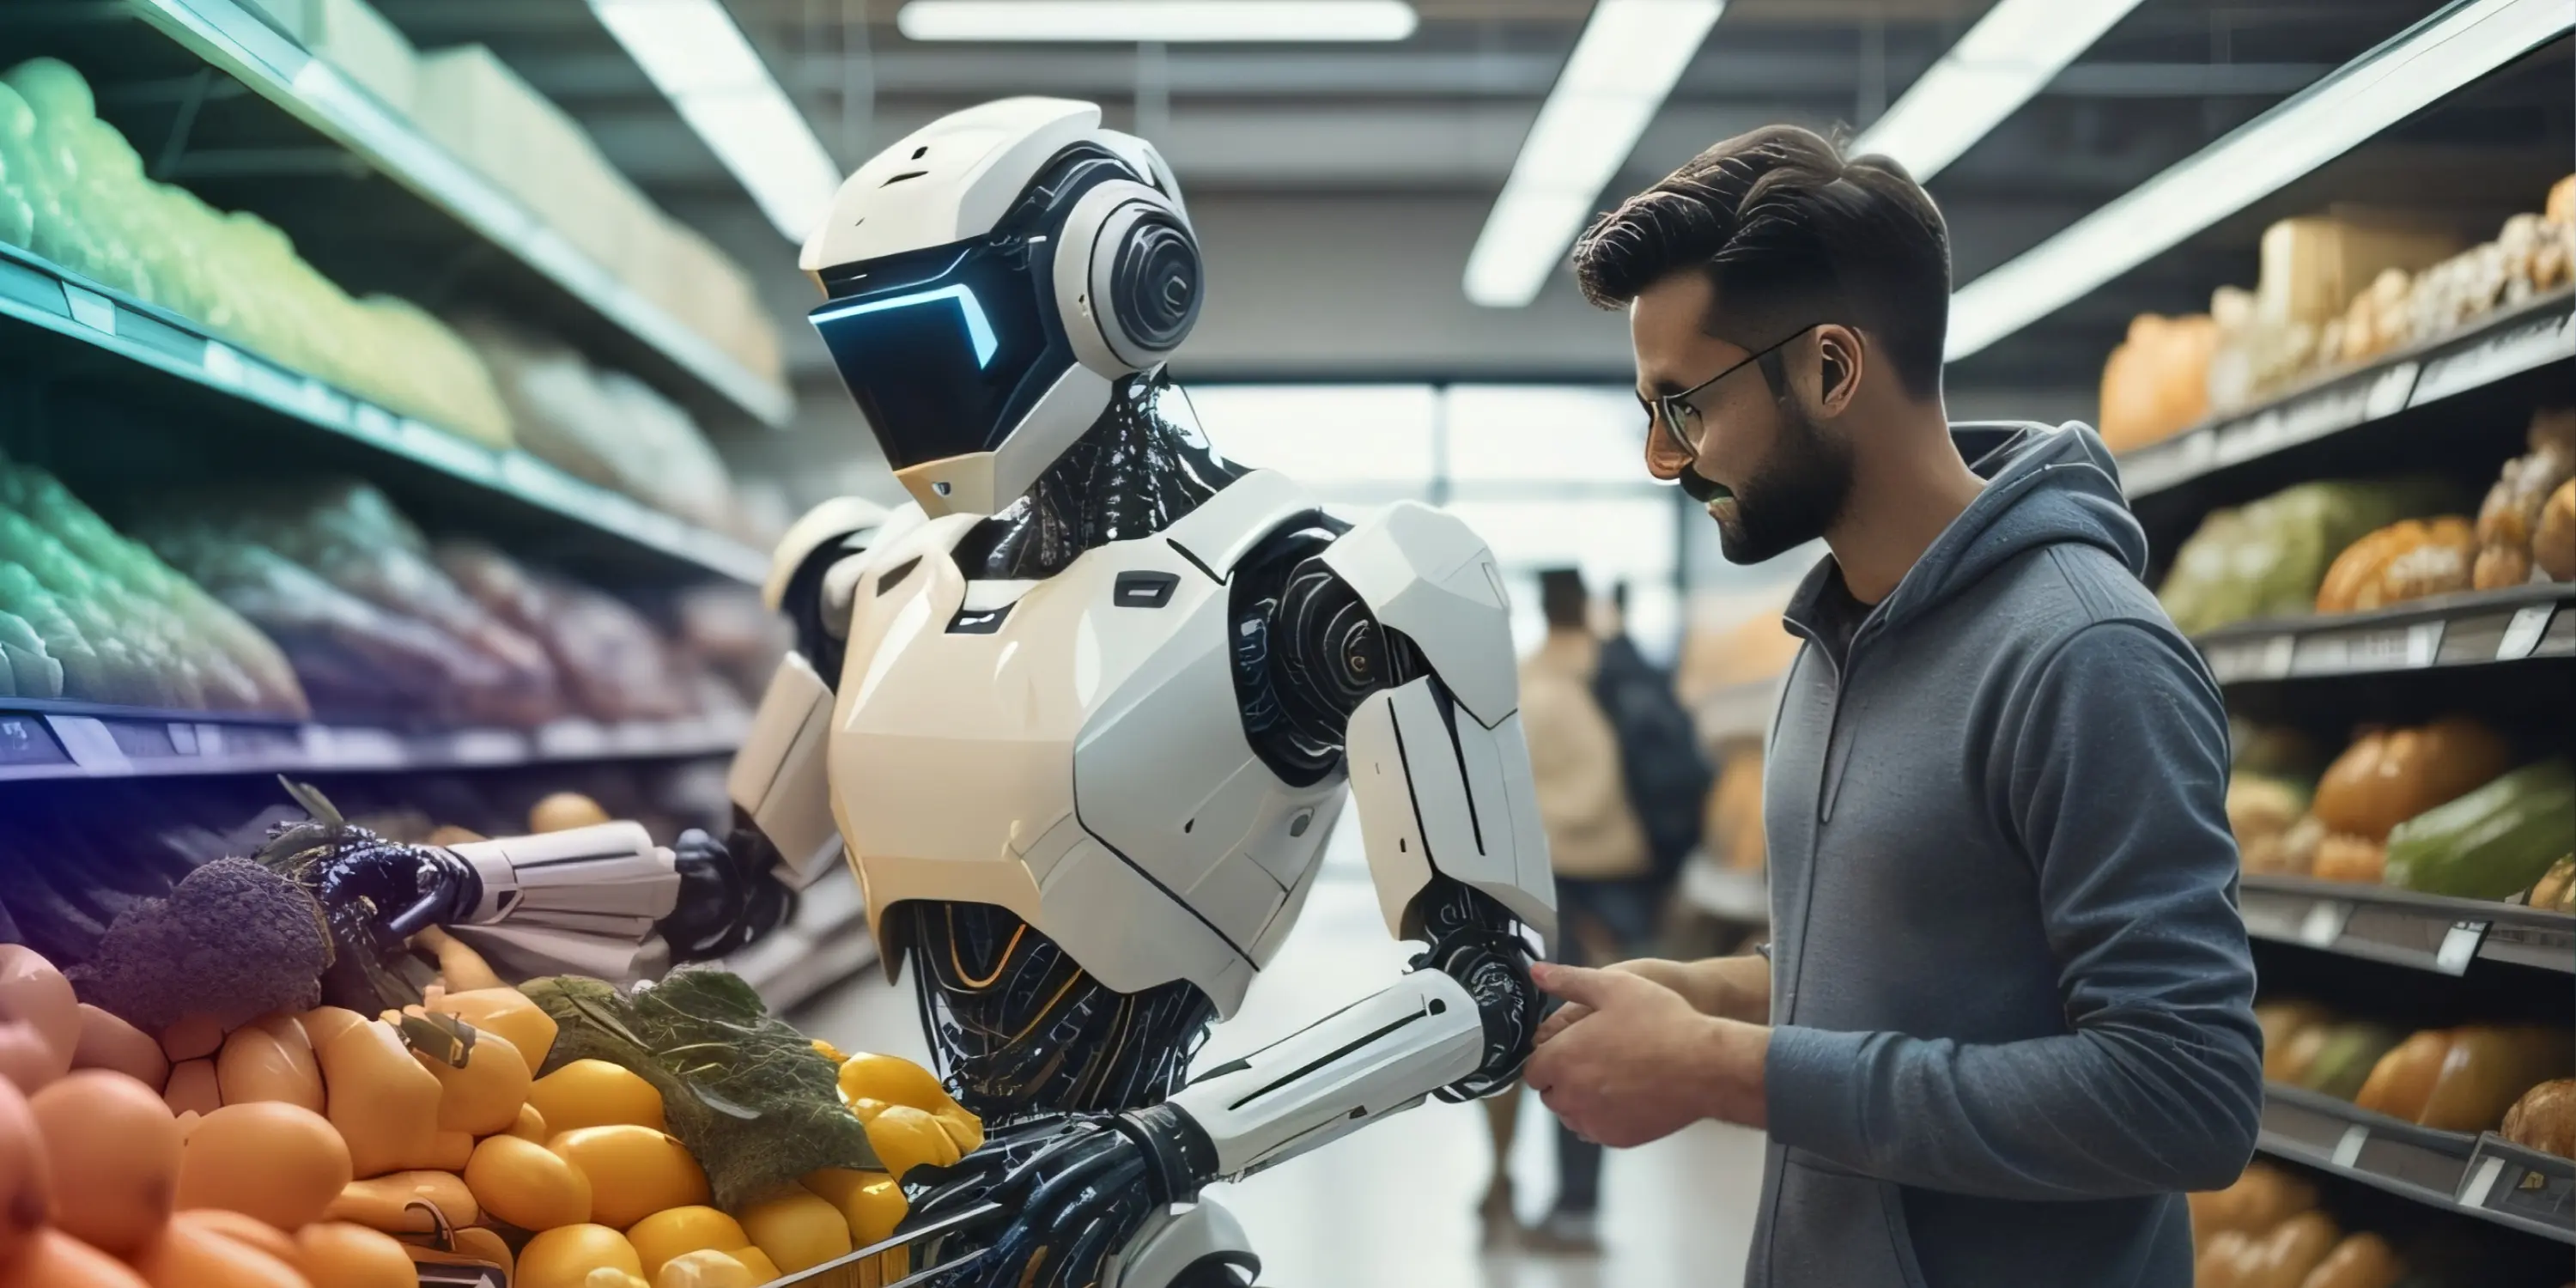 Robotics and AI Help To Level Up the Retail Industry